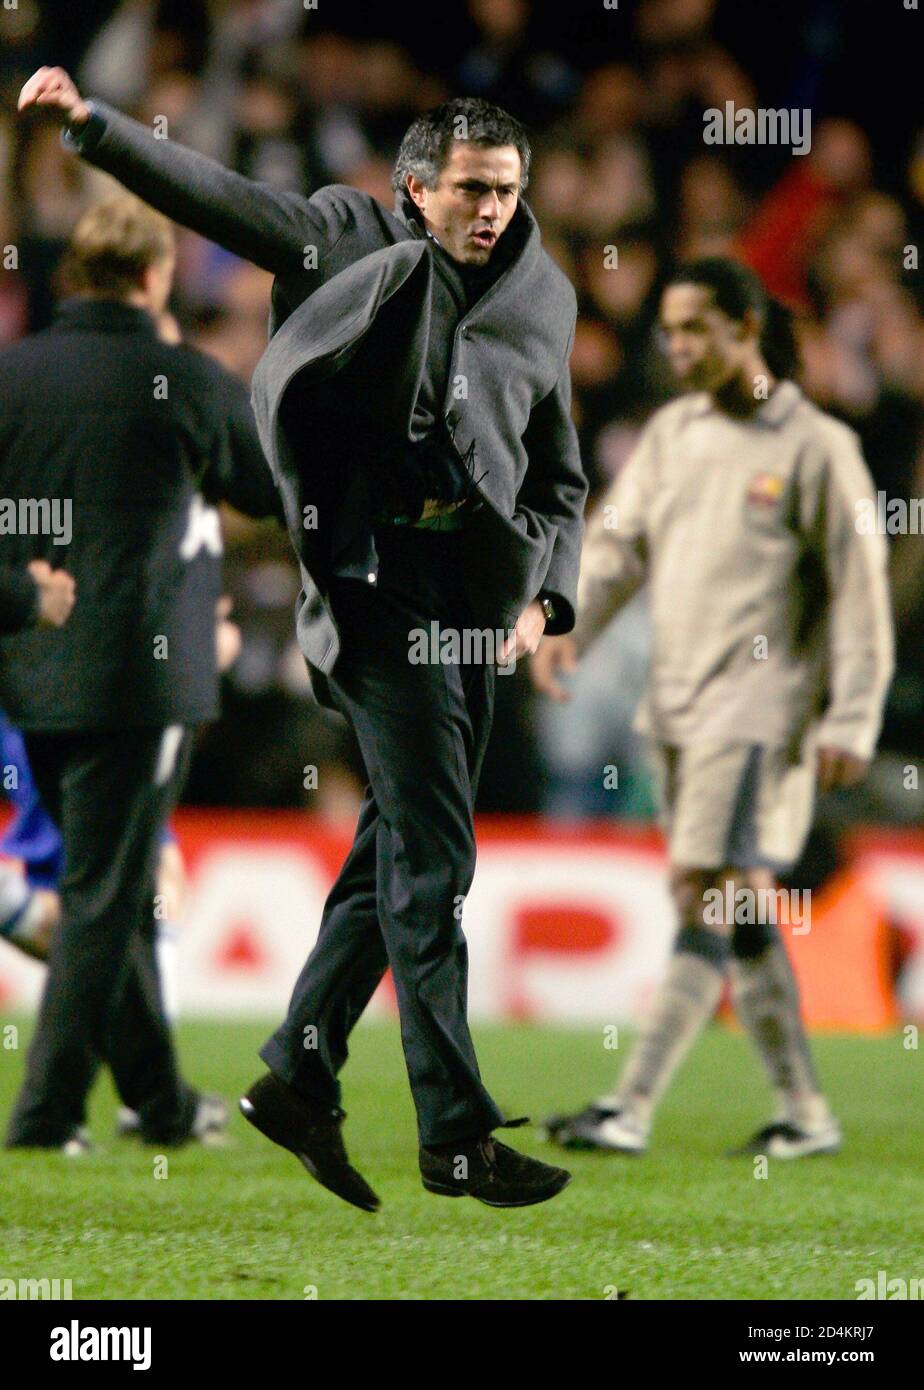 Chelsea S Manager Jose Mourinho Celebrates As Barcelona S Ronaldinho R Walks By As The Final Whistle Is Blown During Their Champions League First Knock Out Round Second Leg Match Against Barcelona At Stamford Bridge